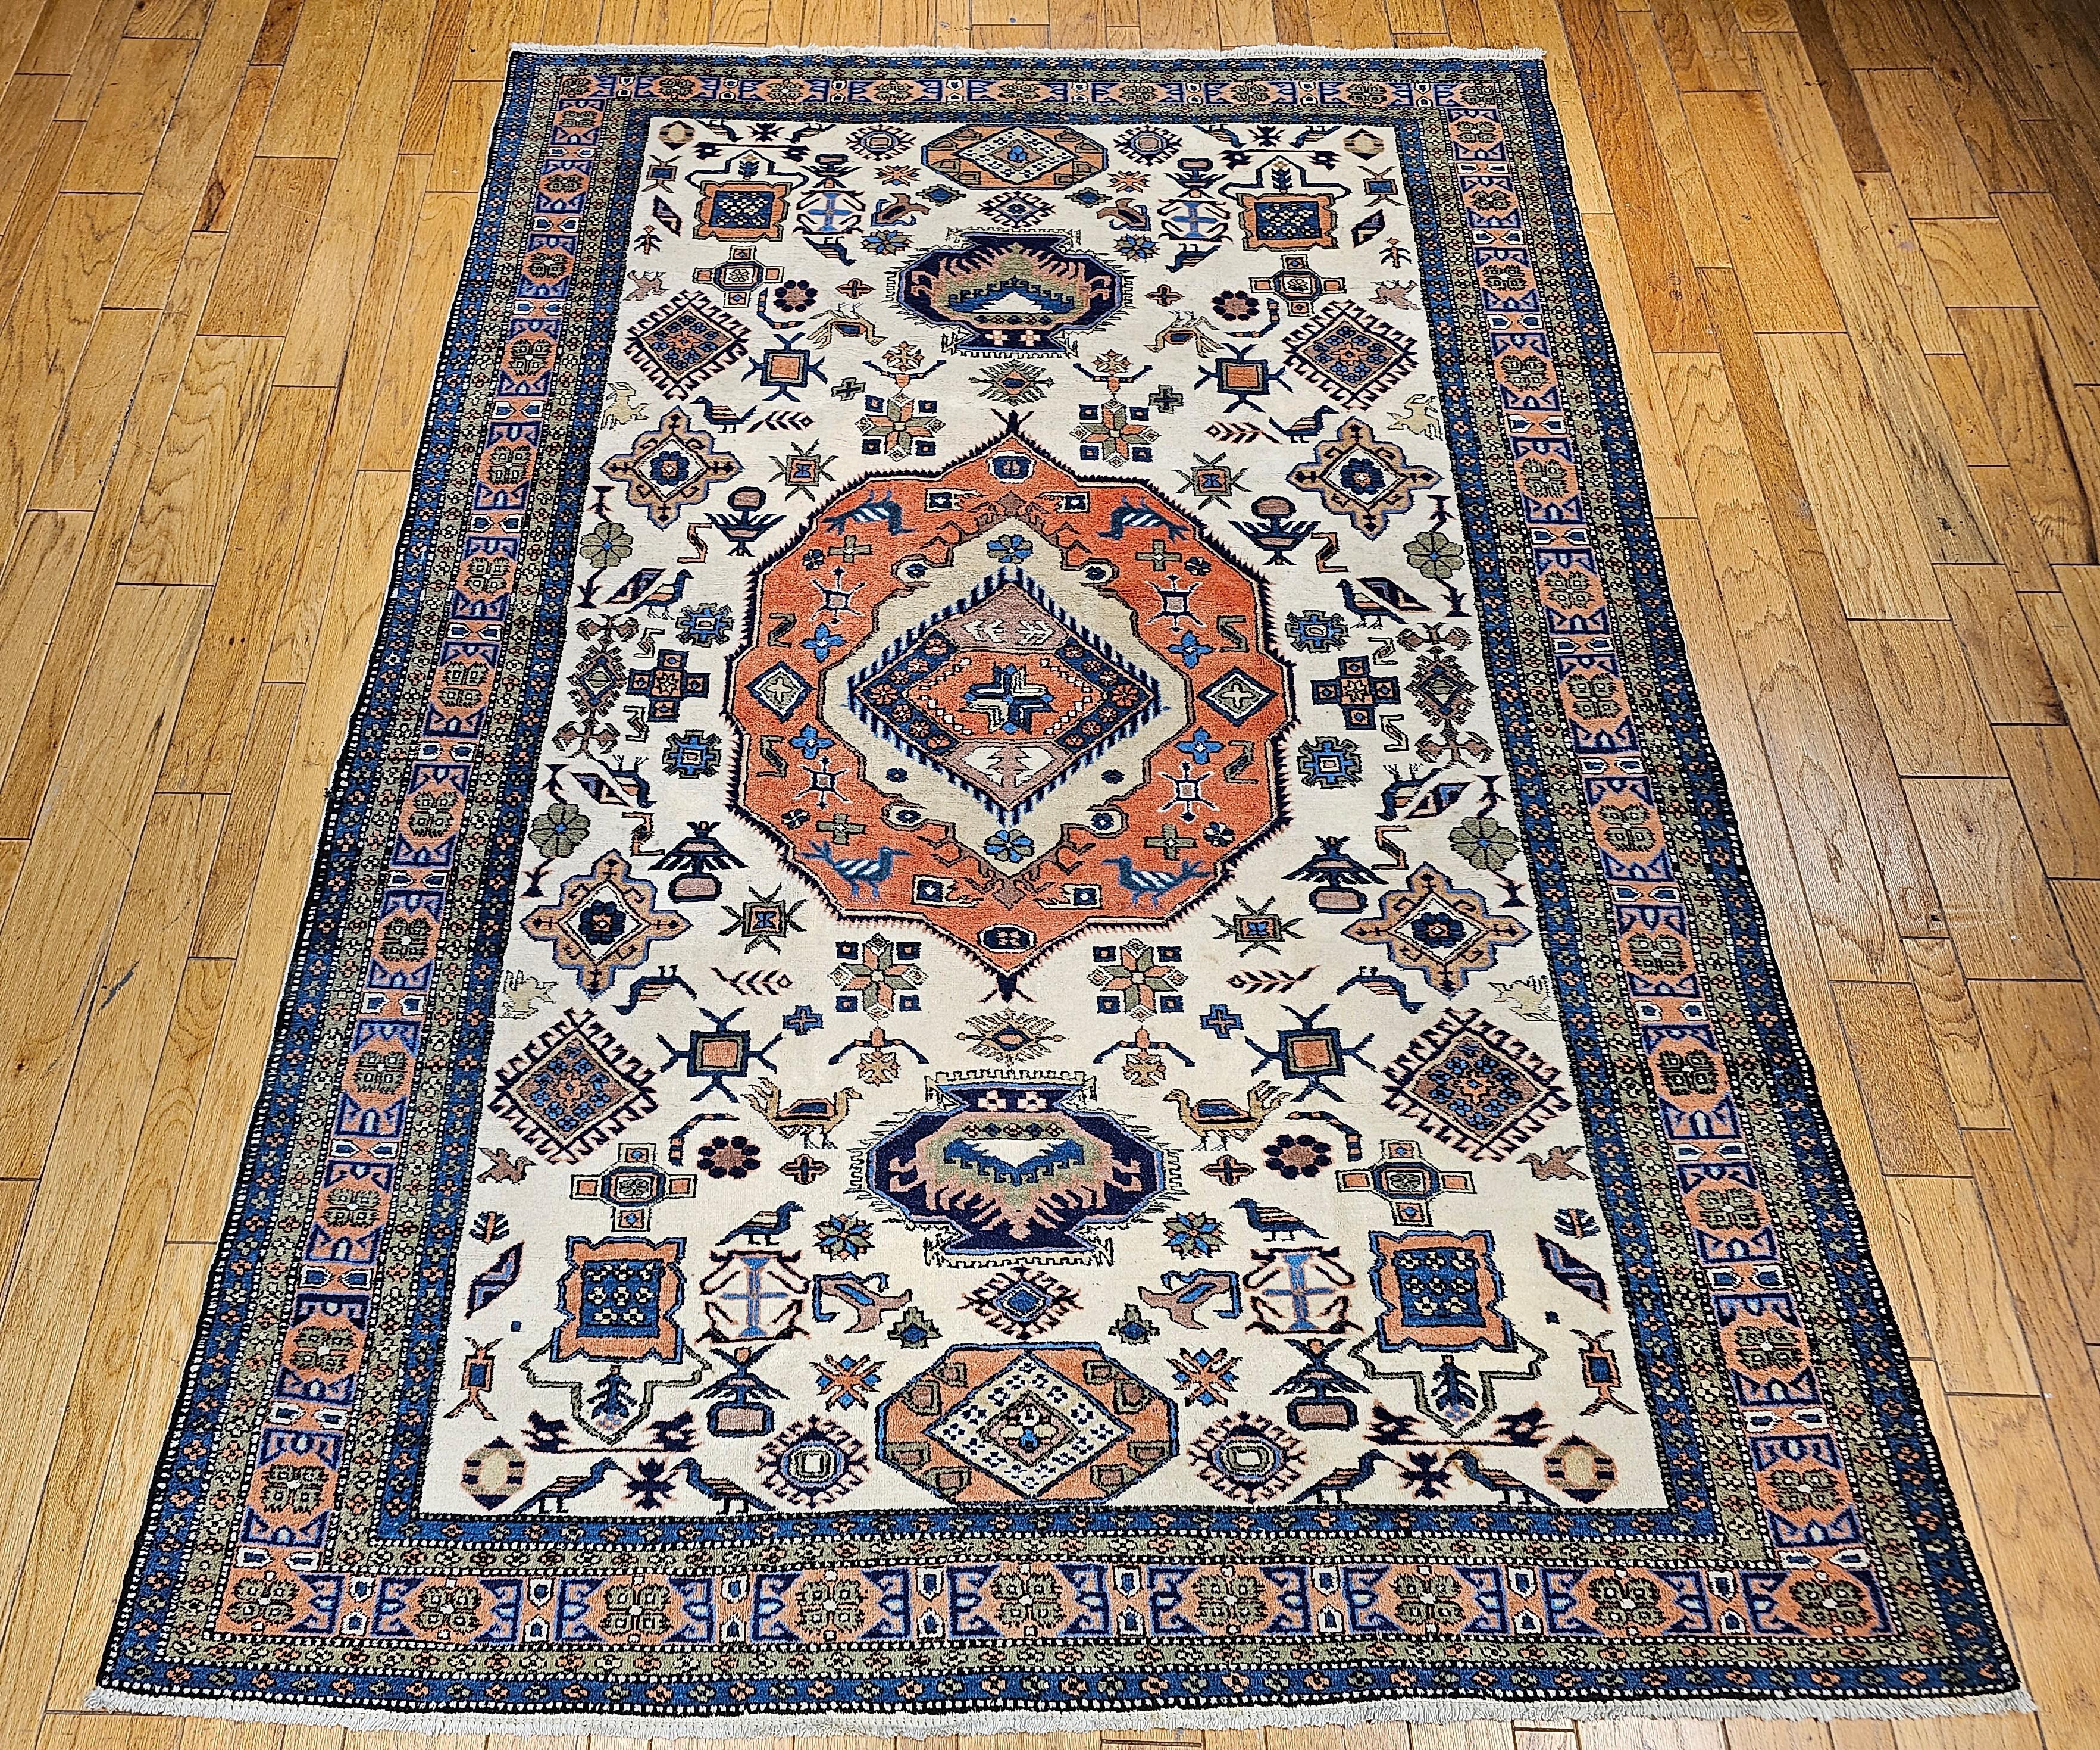 Vintage Persian Ardebil room size carpet from the mid 1900s with a “signature Ardebil” geometric design..   The ancient city of Ardebil is located on Northeast of the Azerbaijan province on the west side of the Caspian Sea and South of the Caucasus